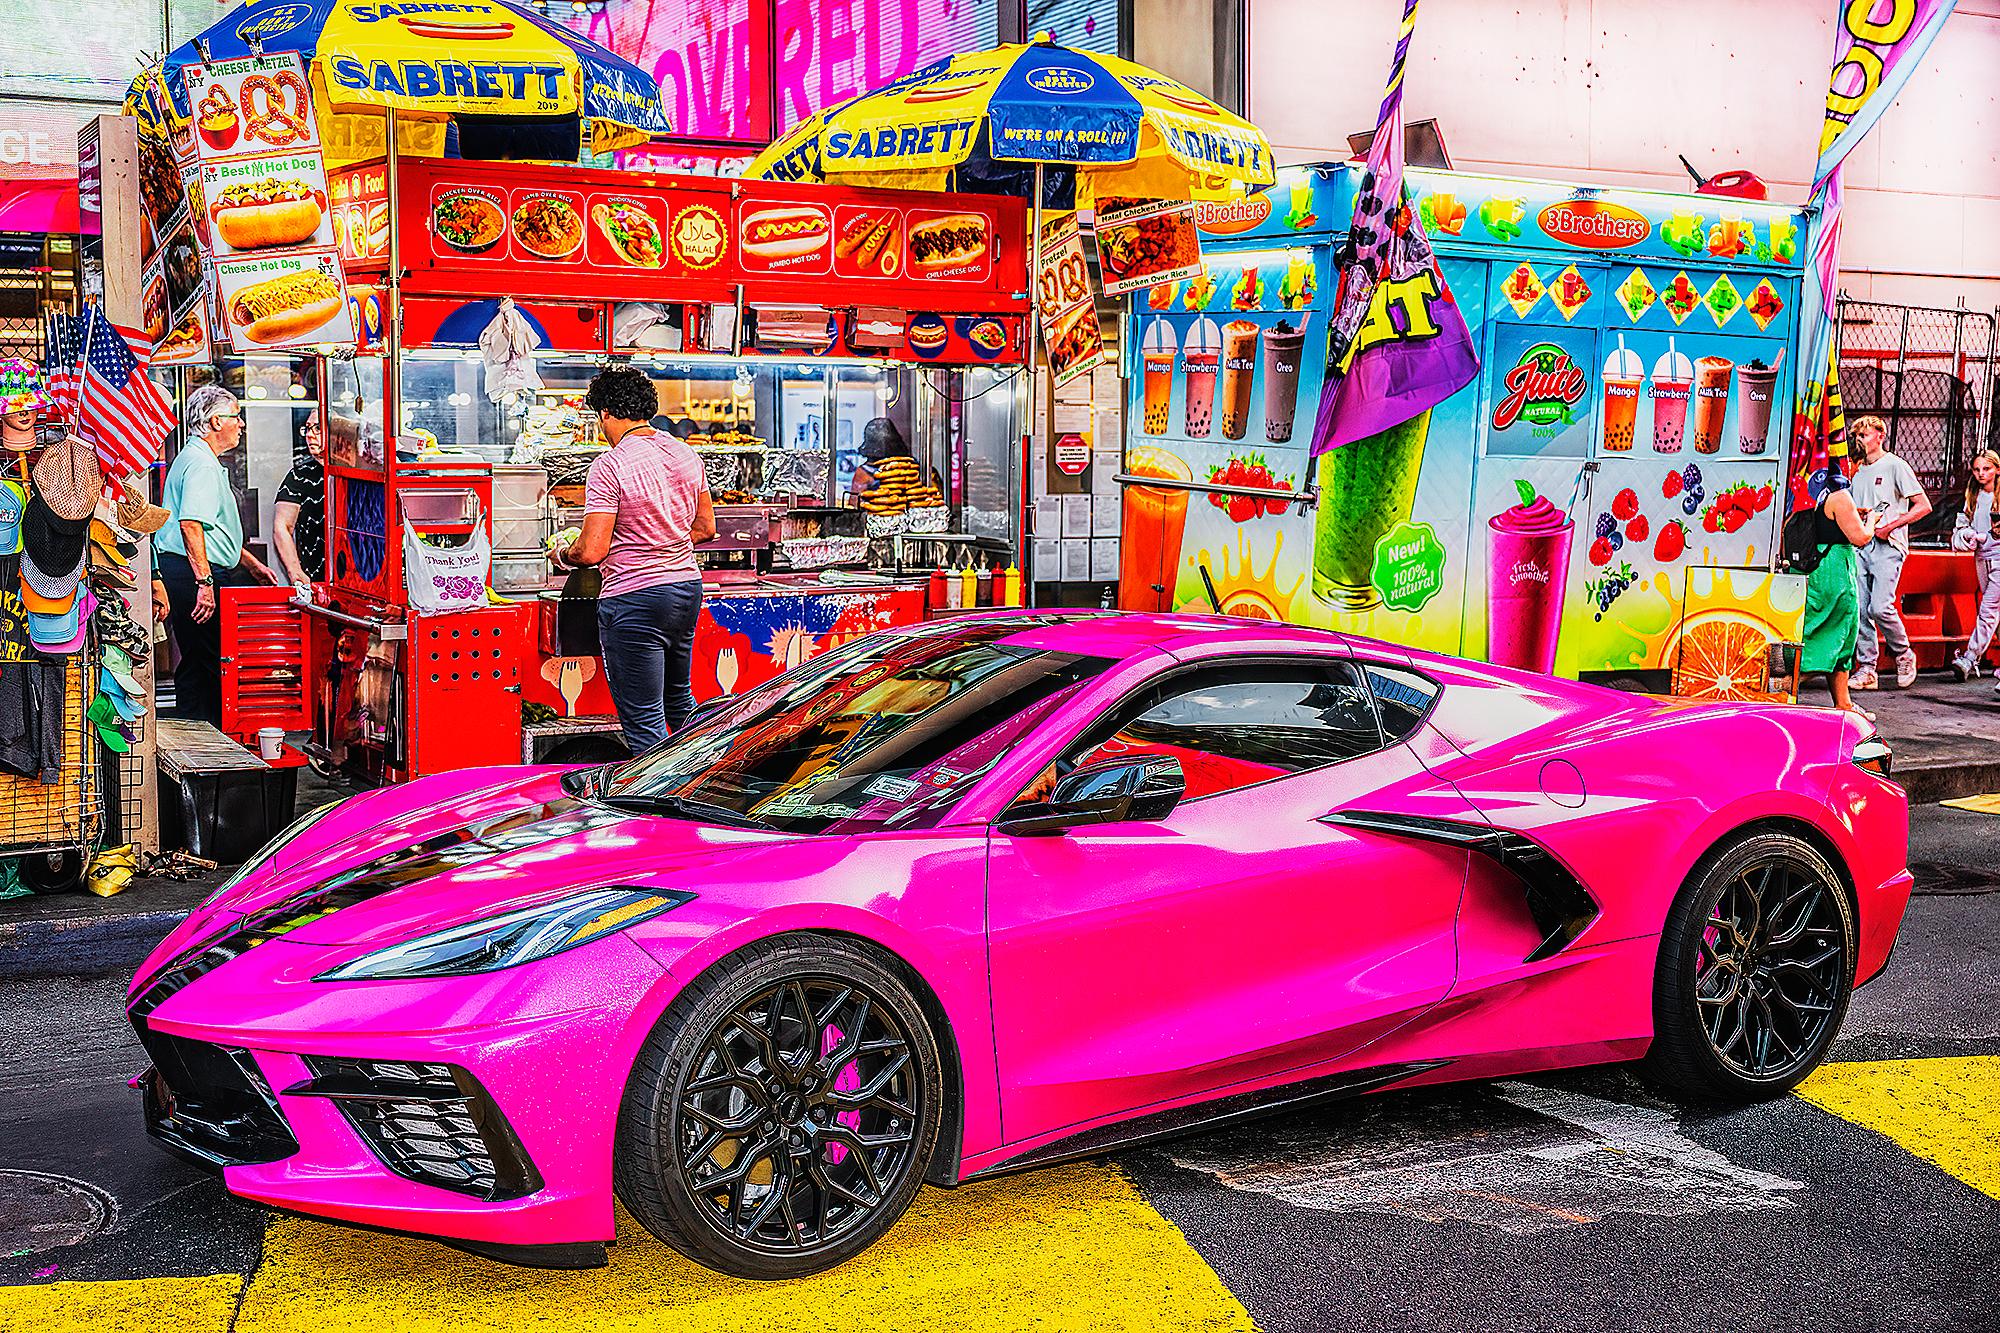 Mitchell Funk Color Photograph - Hot Pink Hot Car in Times Square  - Automotive